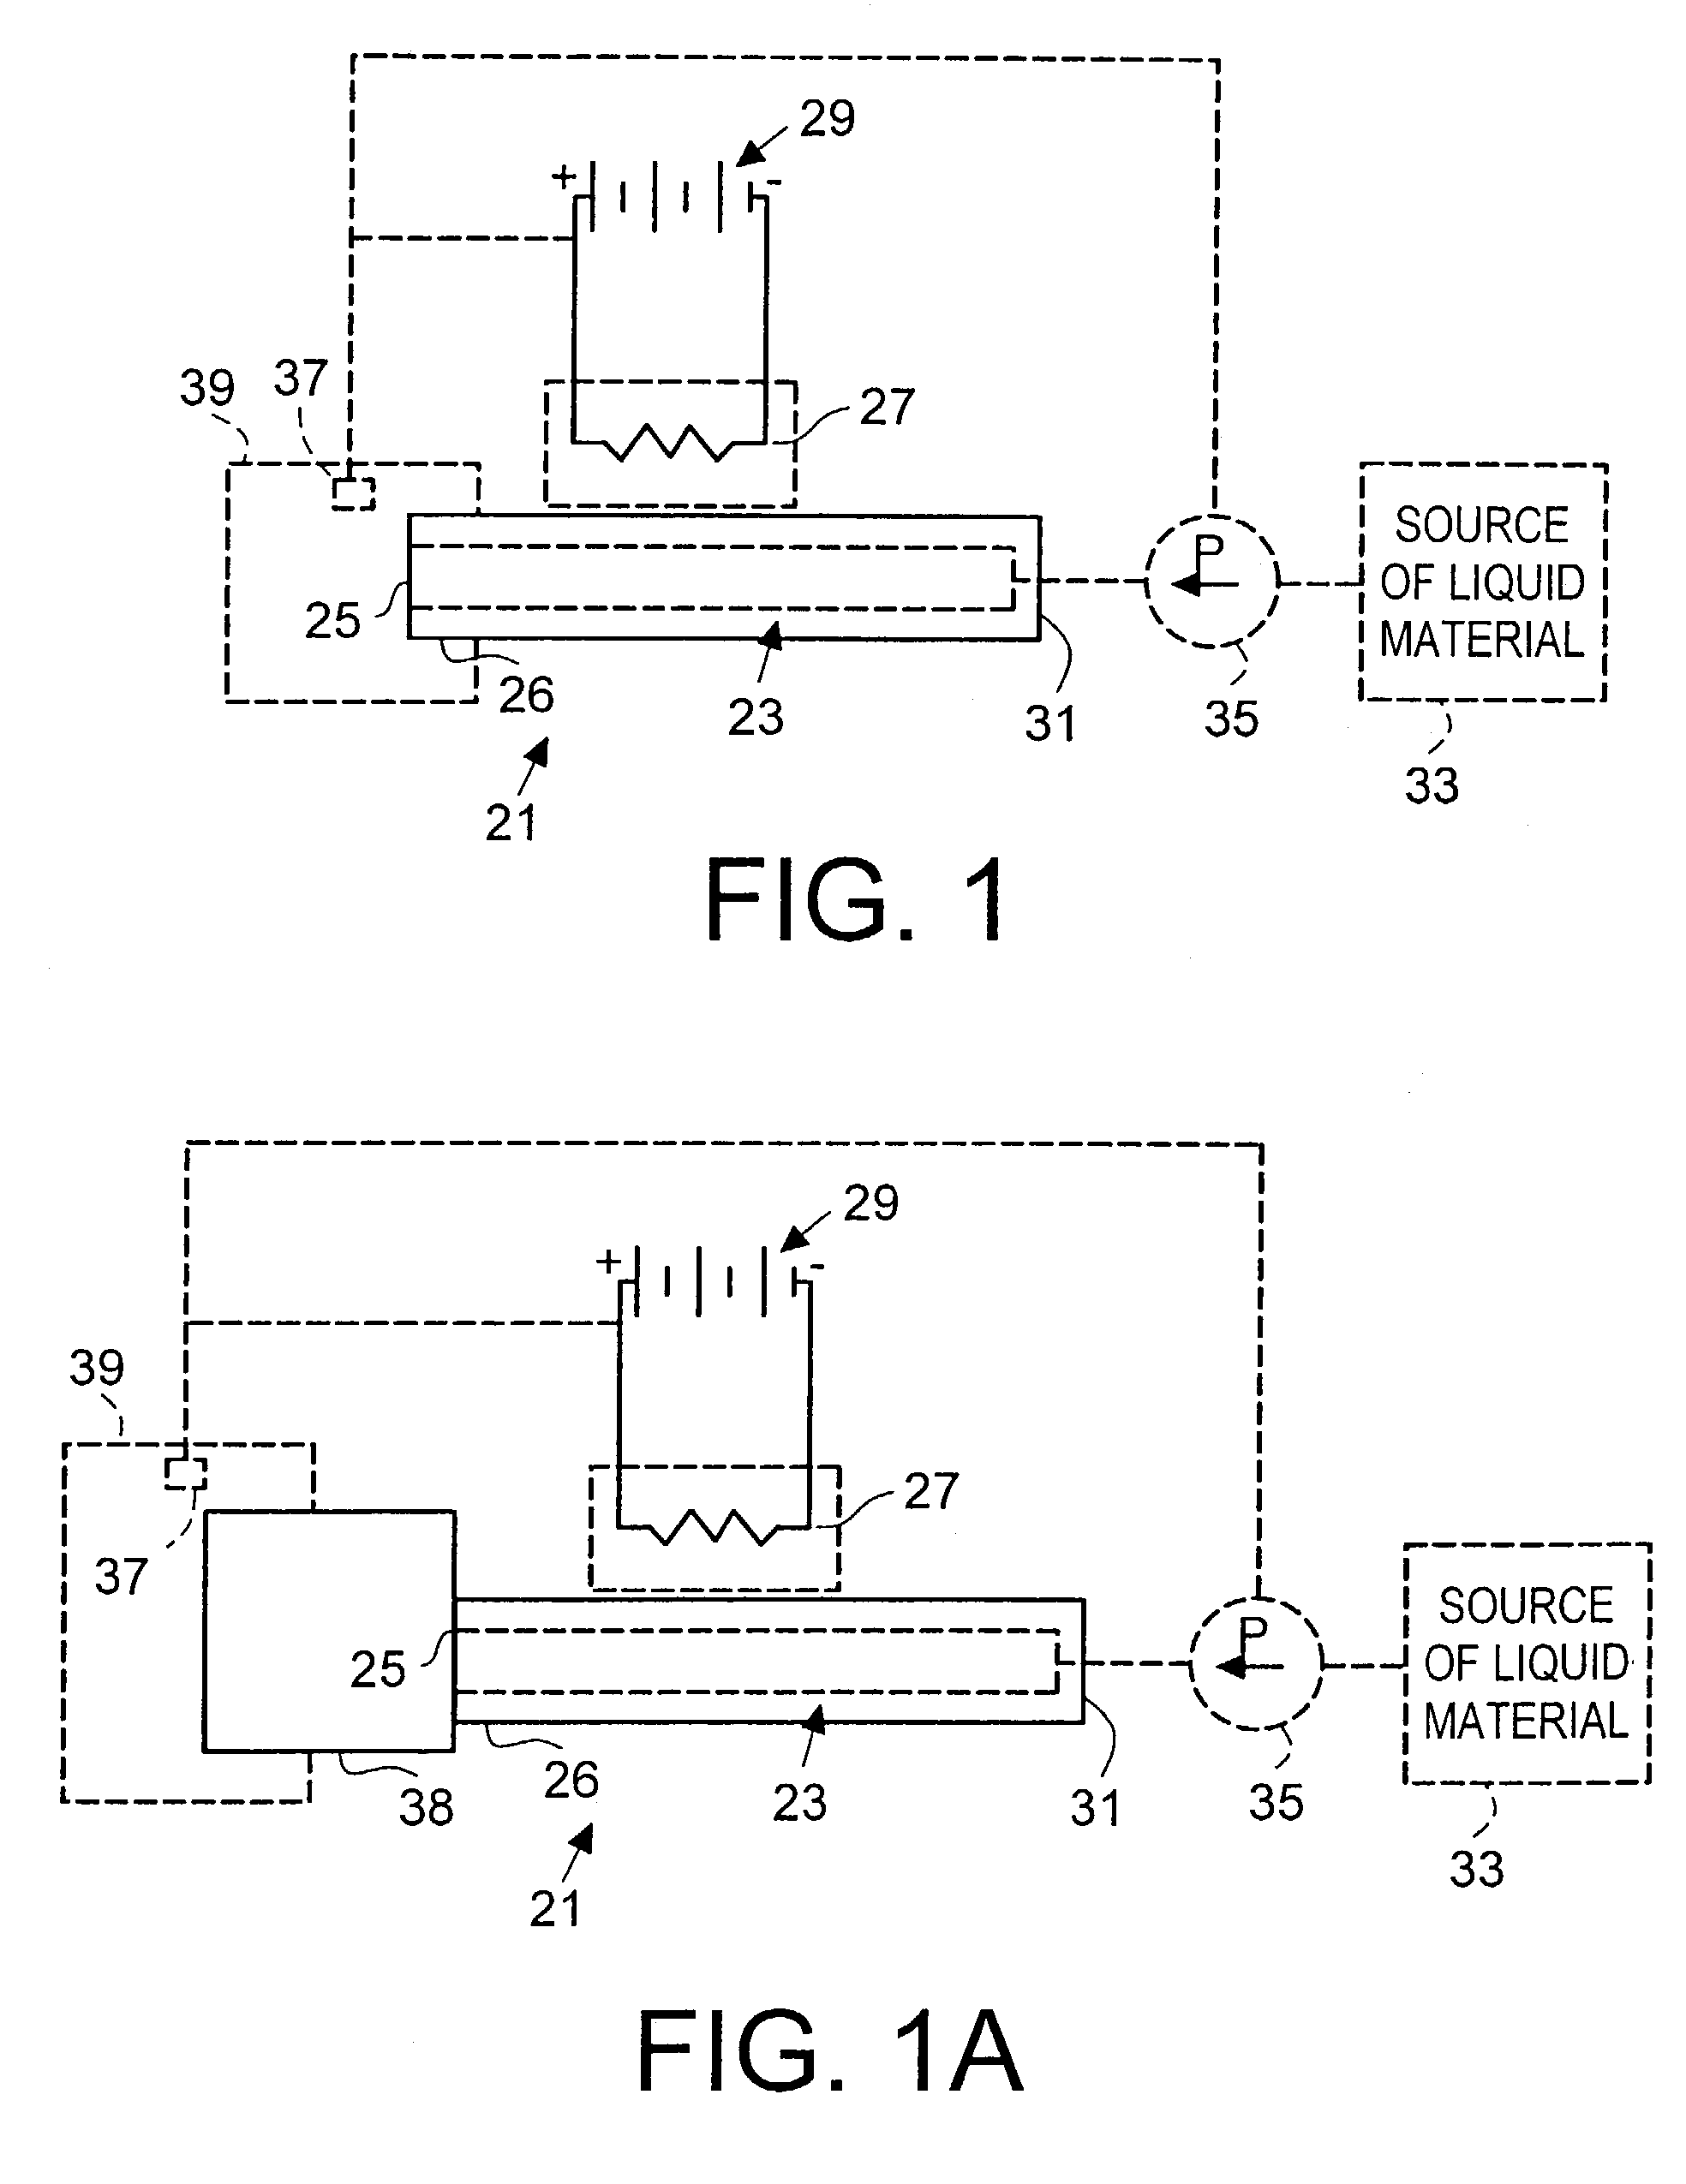 Method and apparatus for generating an aerosol